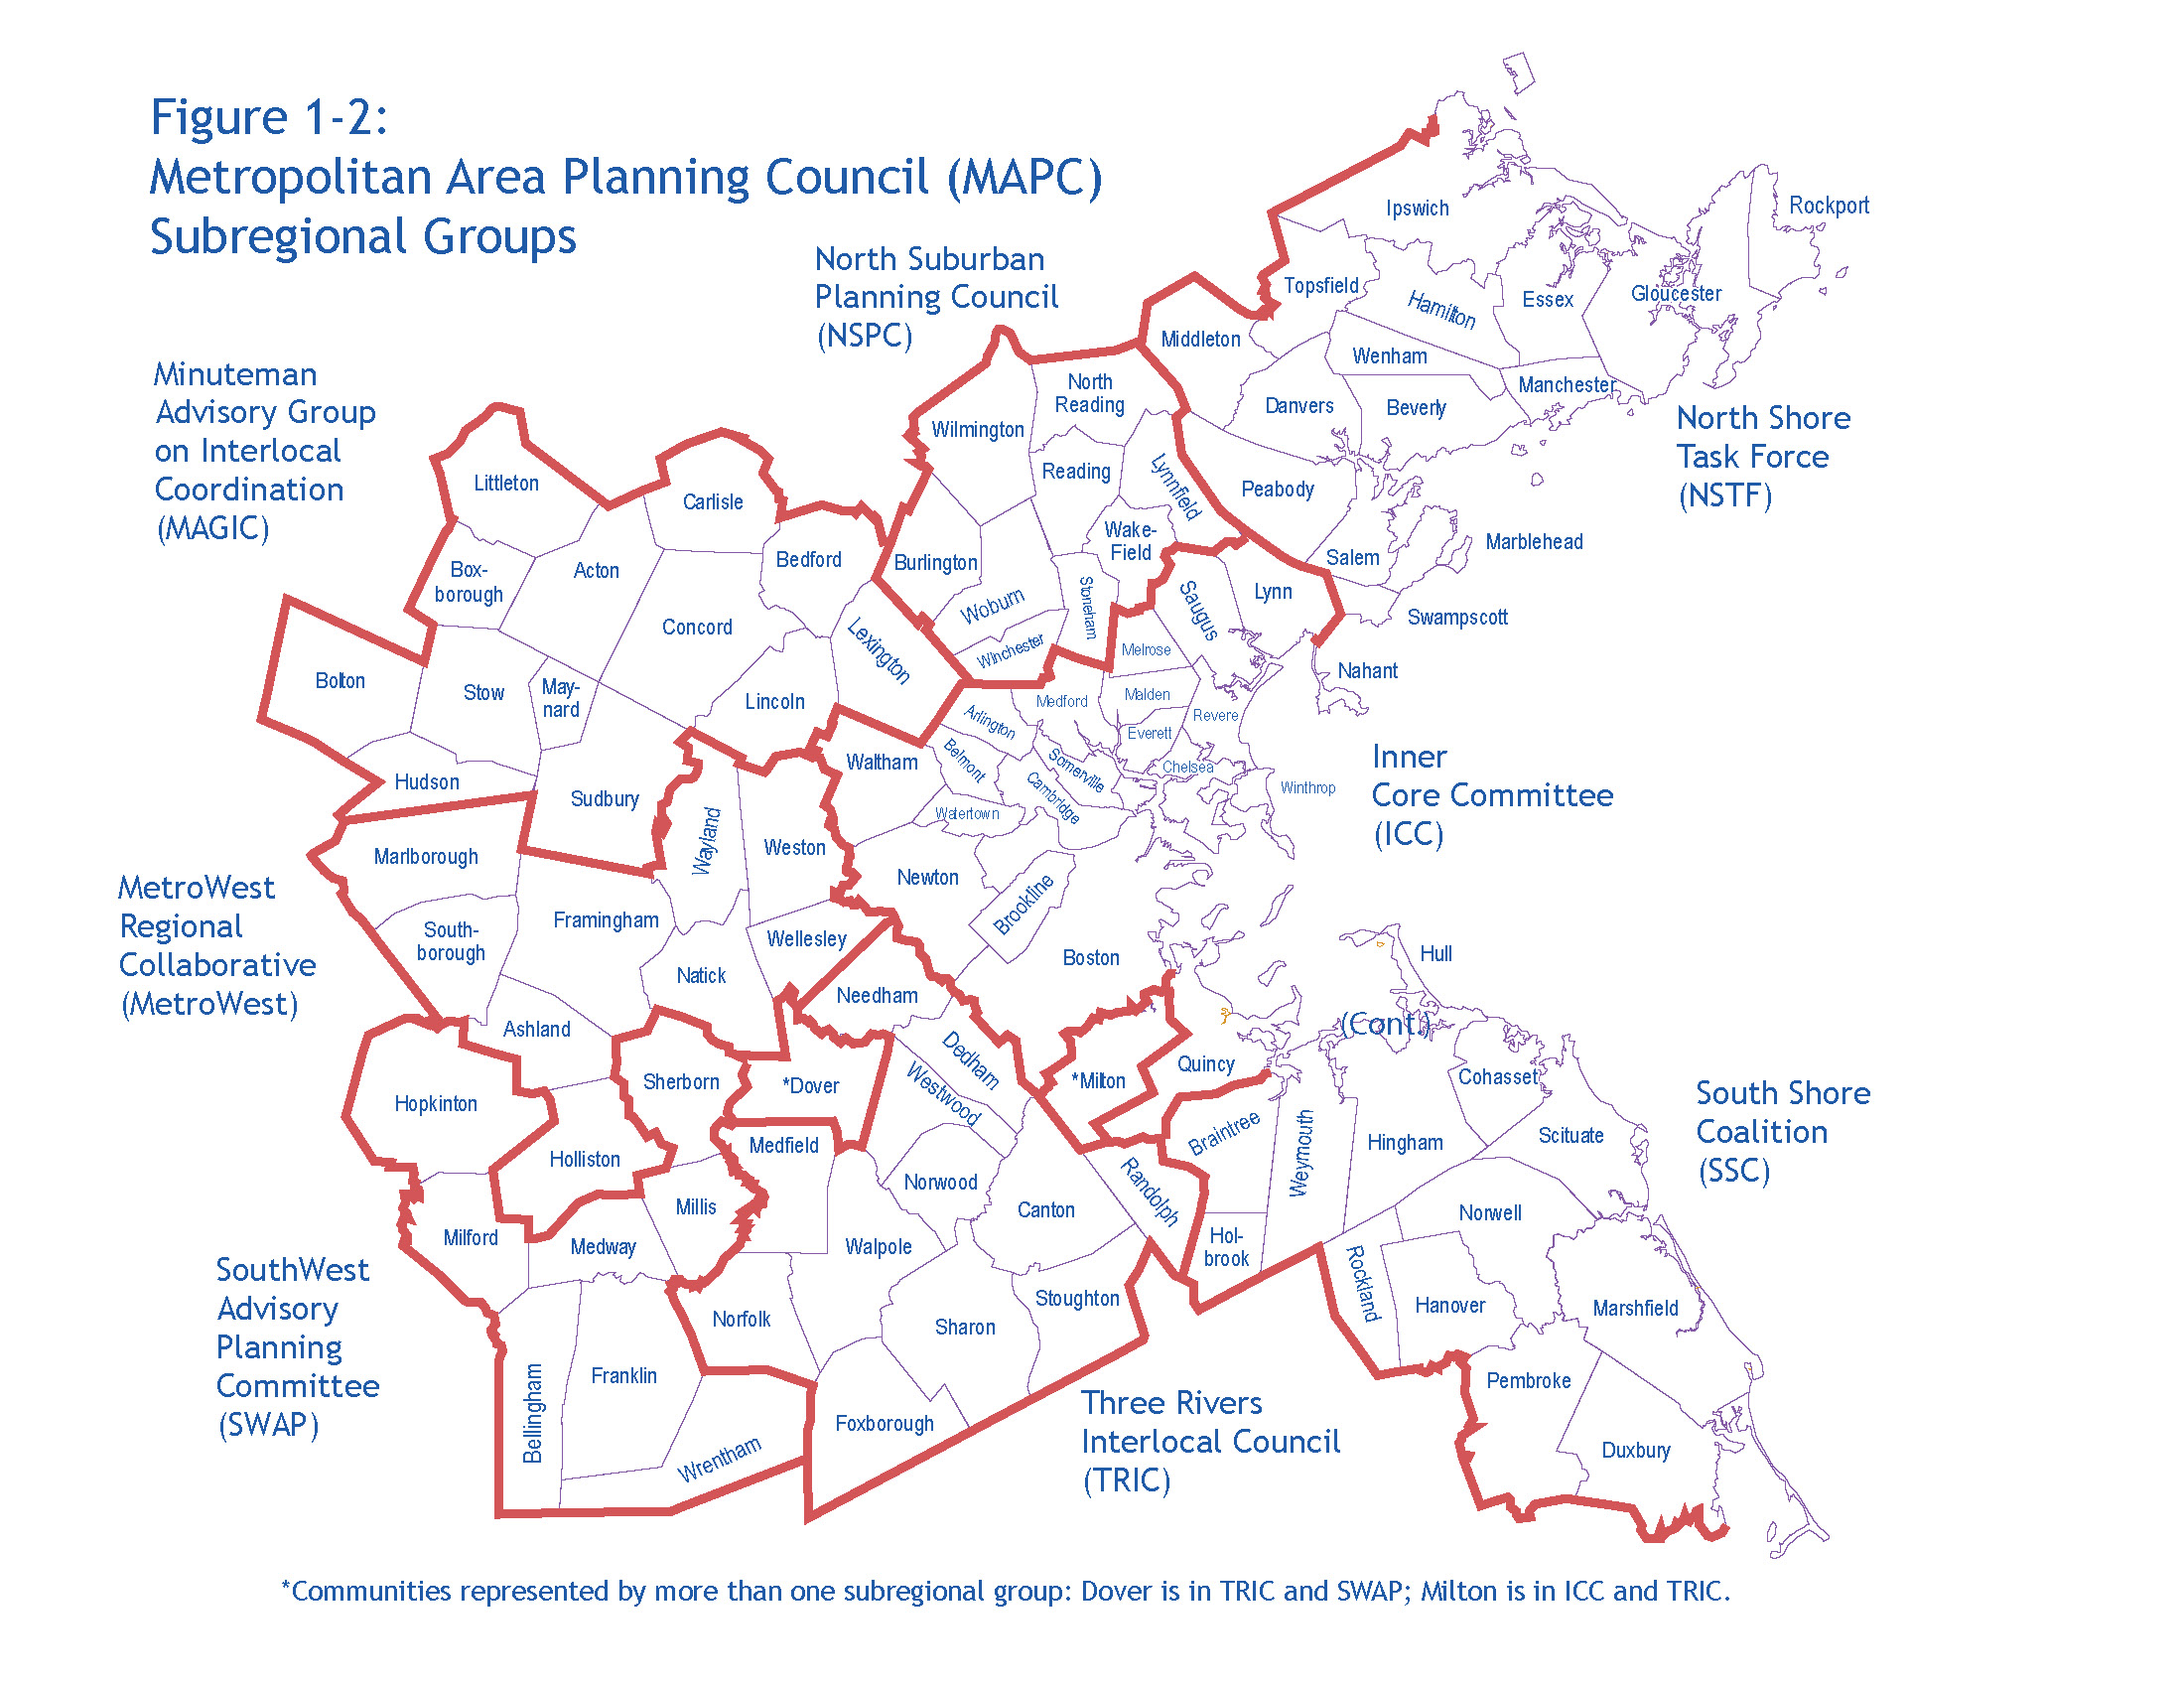 This map shows how the 101 municipalities in the Boston Region MPO region are located in eight MAPC subregions, which are represented by subregional groups. These subregional groups include the Inner Core Committee (ICC), the MetroWest Regional Collaborative (MetroWest), the Minuteman Advisory Group on Interlocal Coordination (MAGIC), the North Suburban Planning Council (NSPC), the North Shore Task Force (NSTF), the South Shore Coalition (SSC), the SouthWest Advisory Planning Committee (SWAP), and the Three Rivers Interlocal Council (TRIC). Two communities are represented by more than one subregional group; Dover is in TRIC and SWAP, and Milton is in ICC and TRIC.